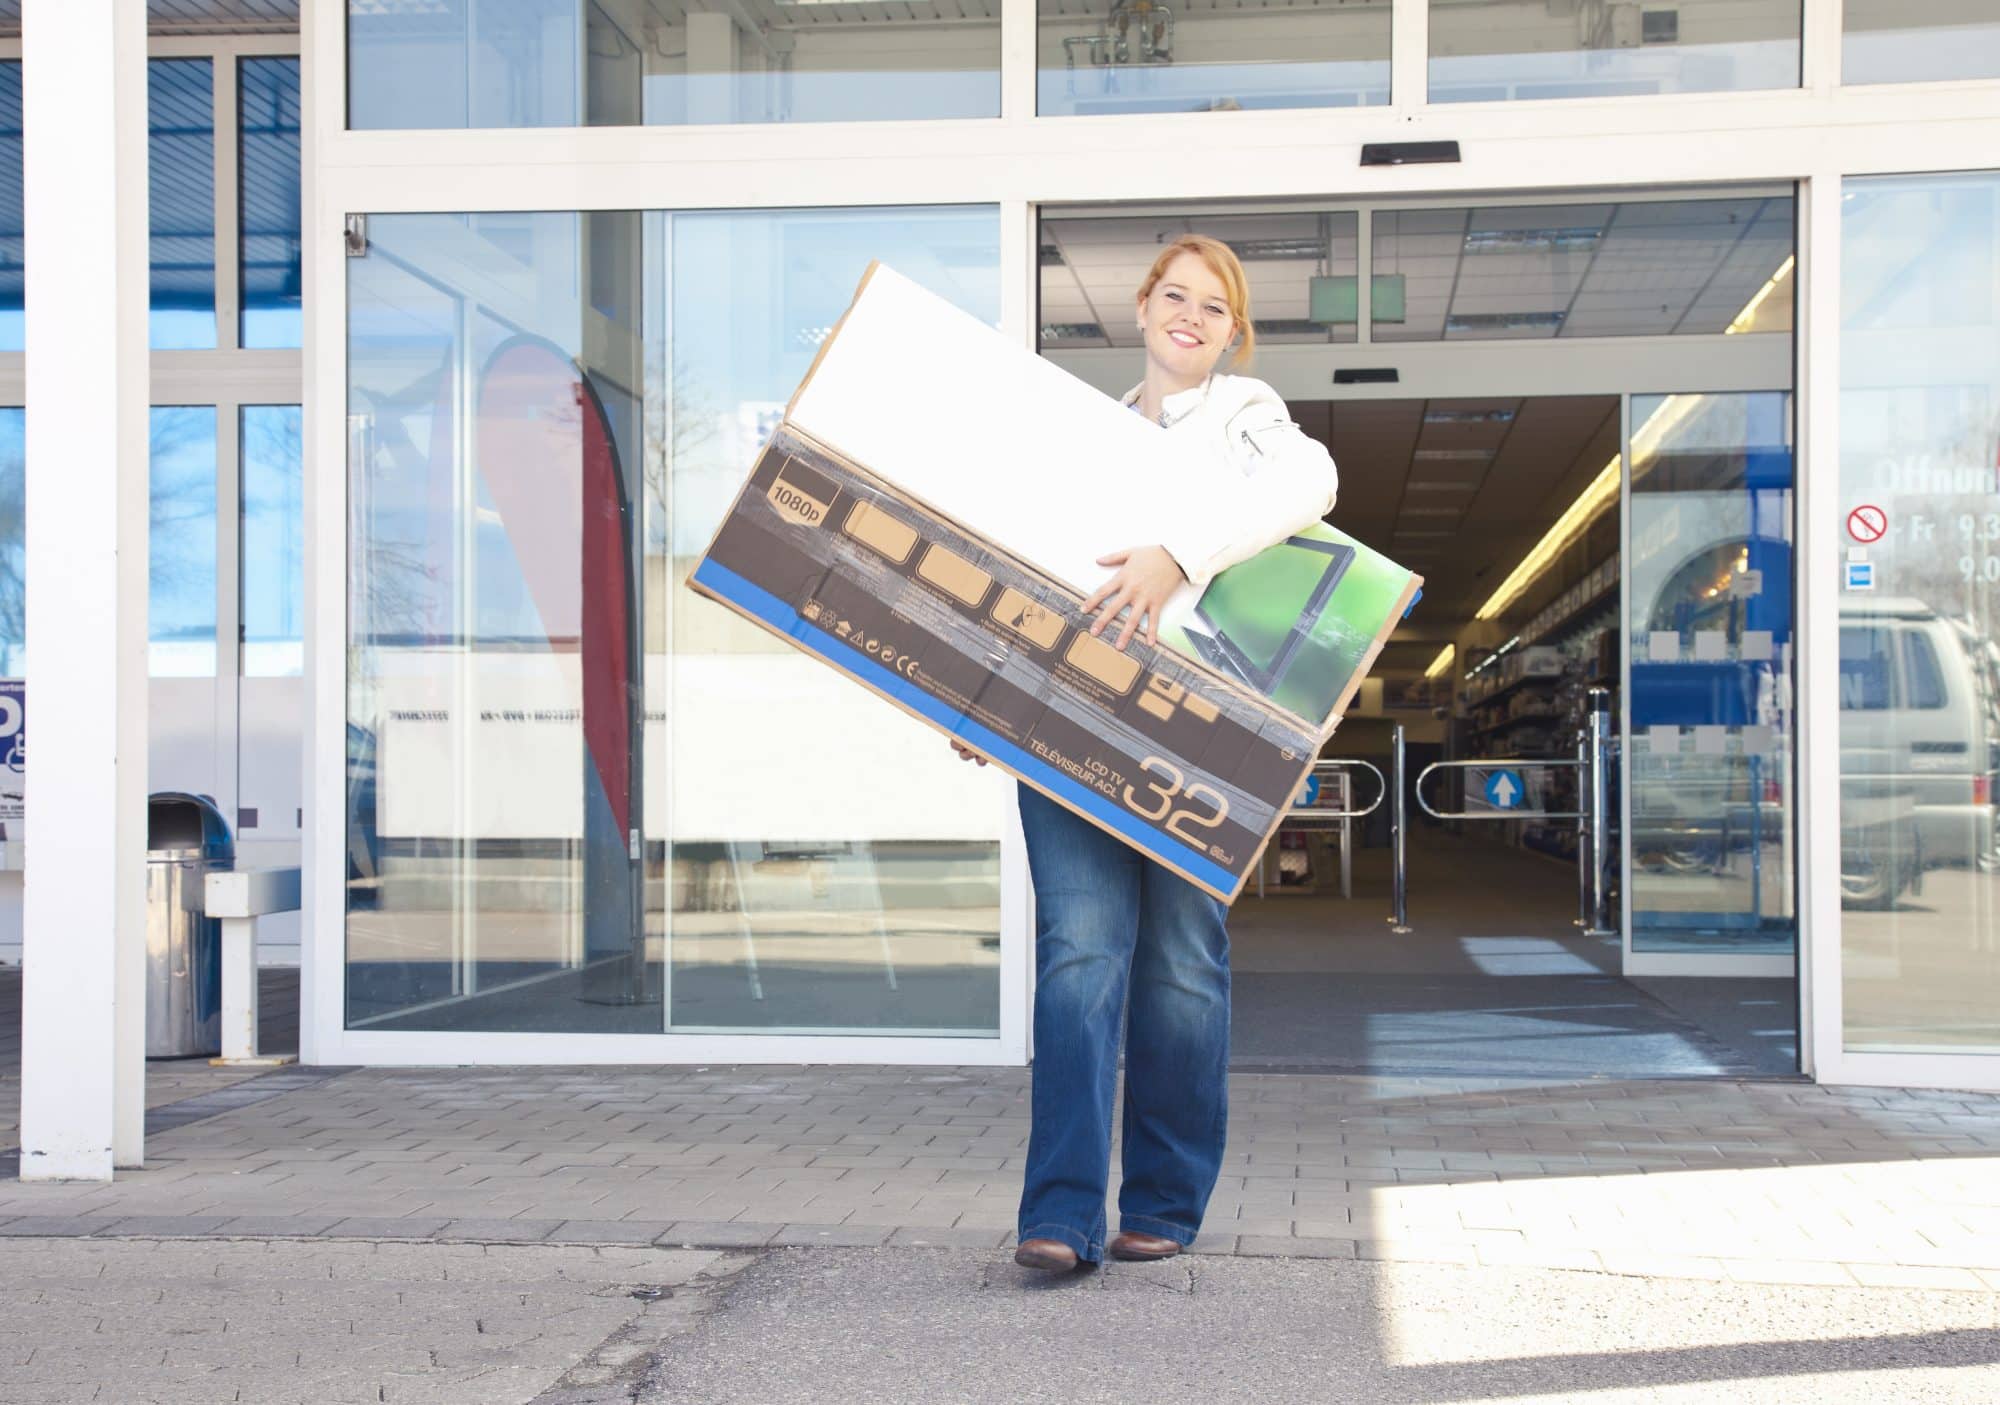 woman coming out of a store after purchase a television